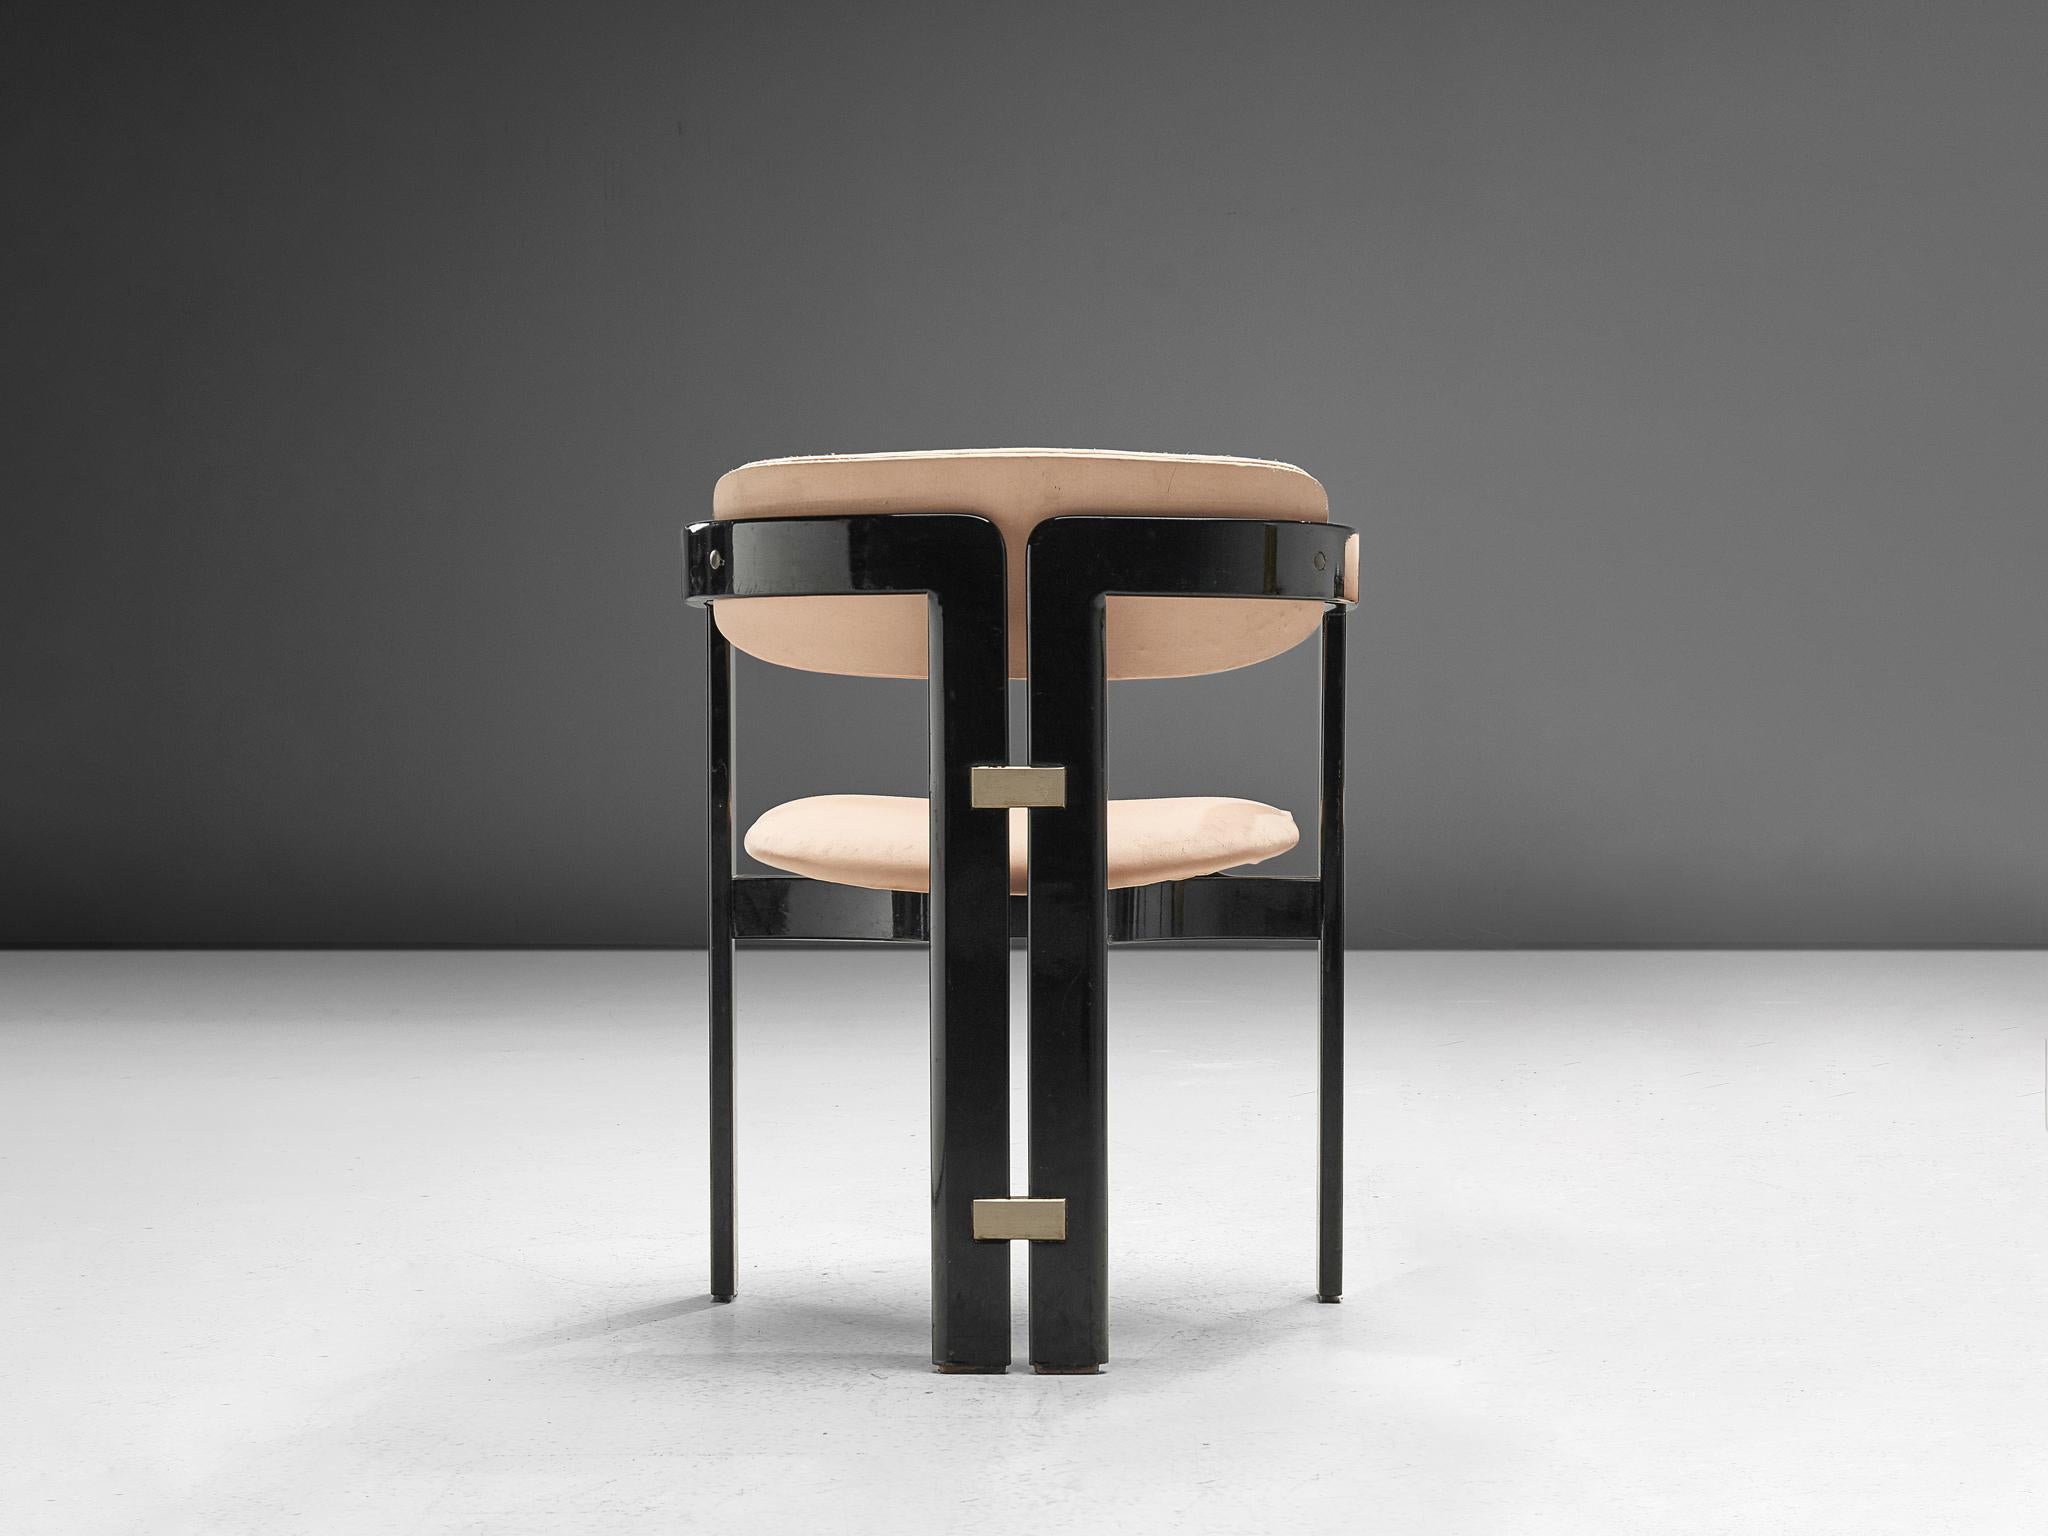 Augusto Savini for Pozzi, 'Pamplona' dining room chair, ebonized ashwood, pink fabric, Italy, design 1965

Iconic 'Pamplona' armchair in black lacquered ash and soft pink upholstery. A characteristic design by Augusto Savini; simplistic yet very